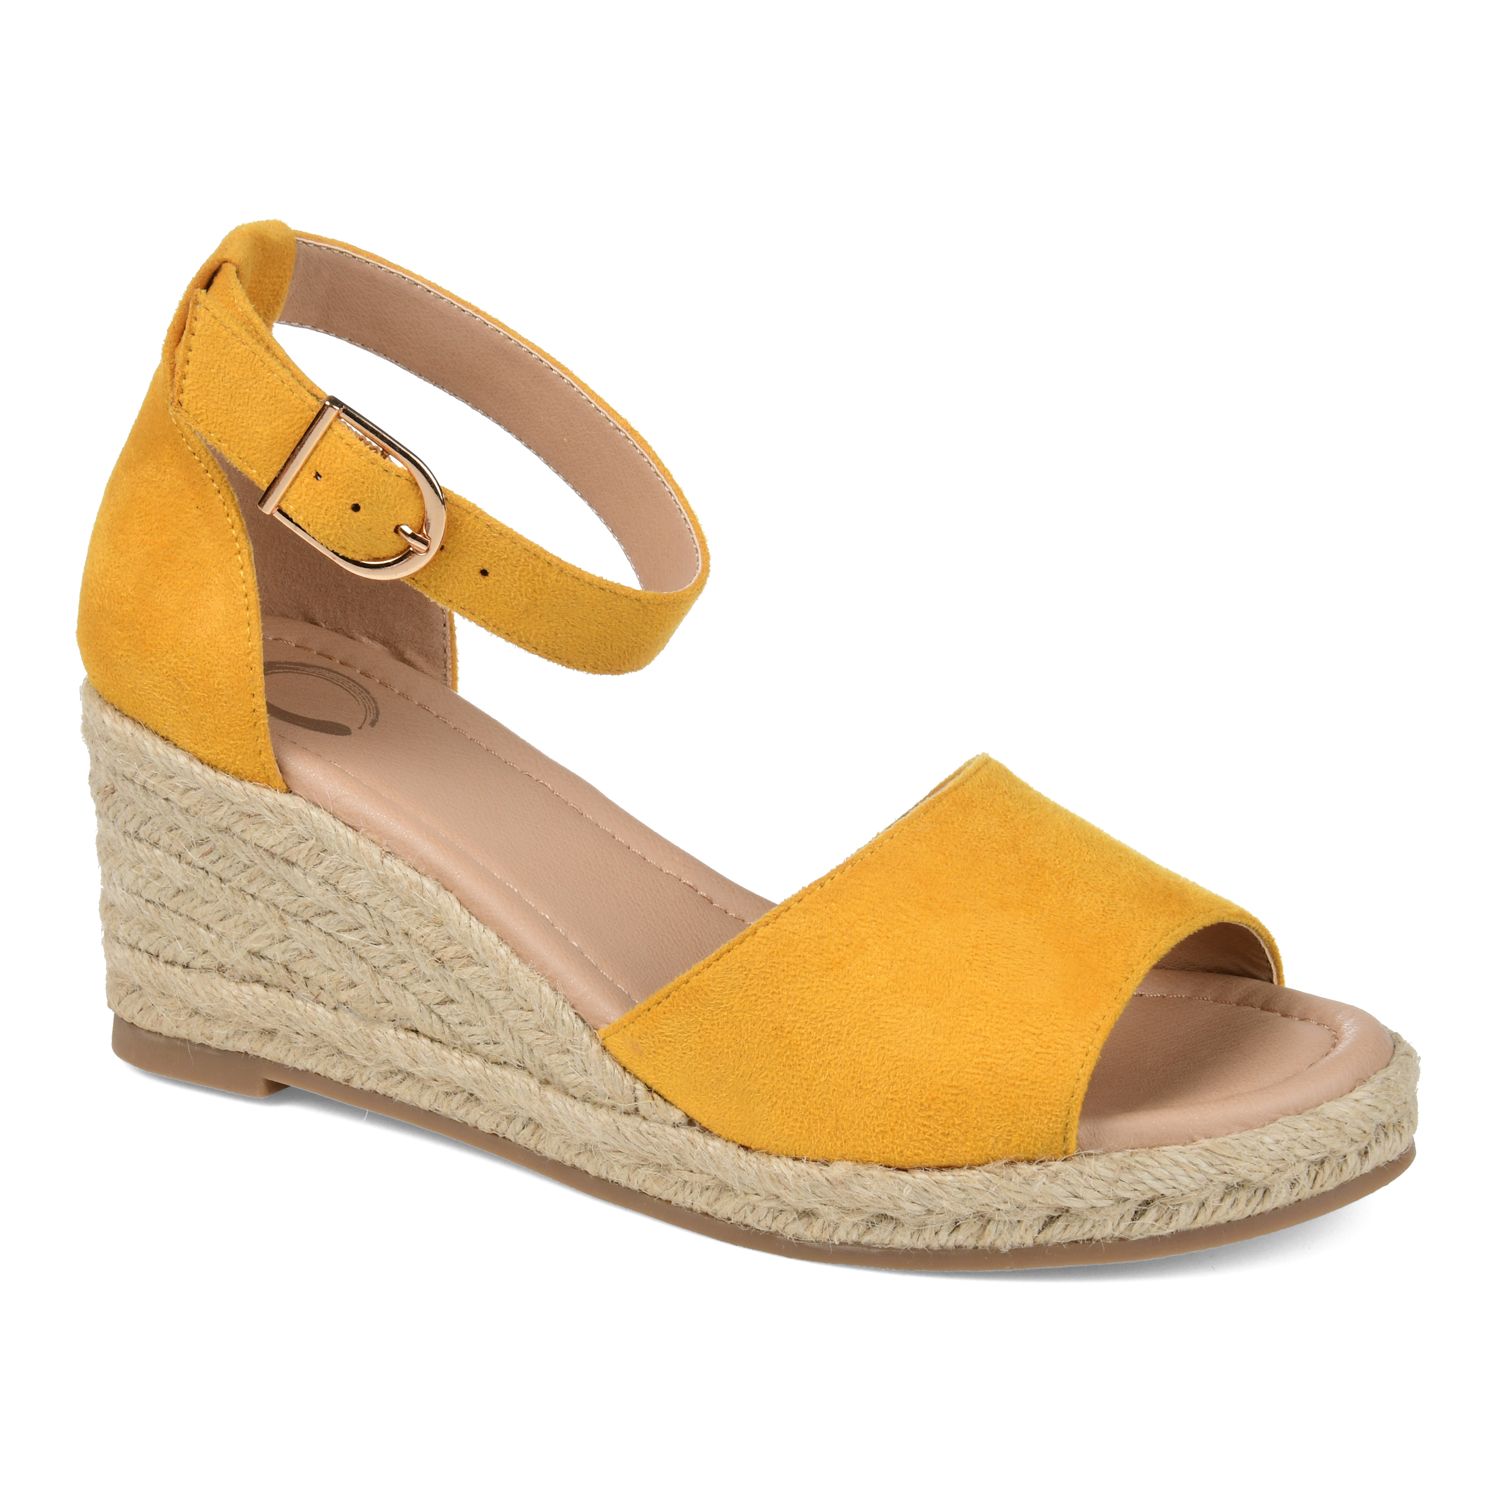 mustard color wedges